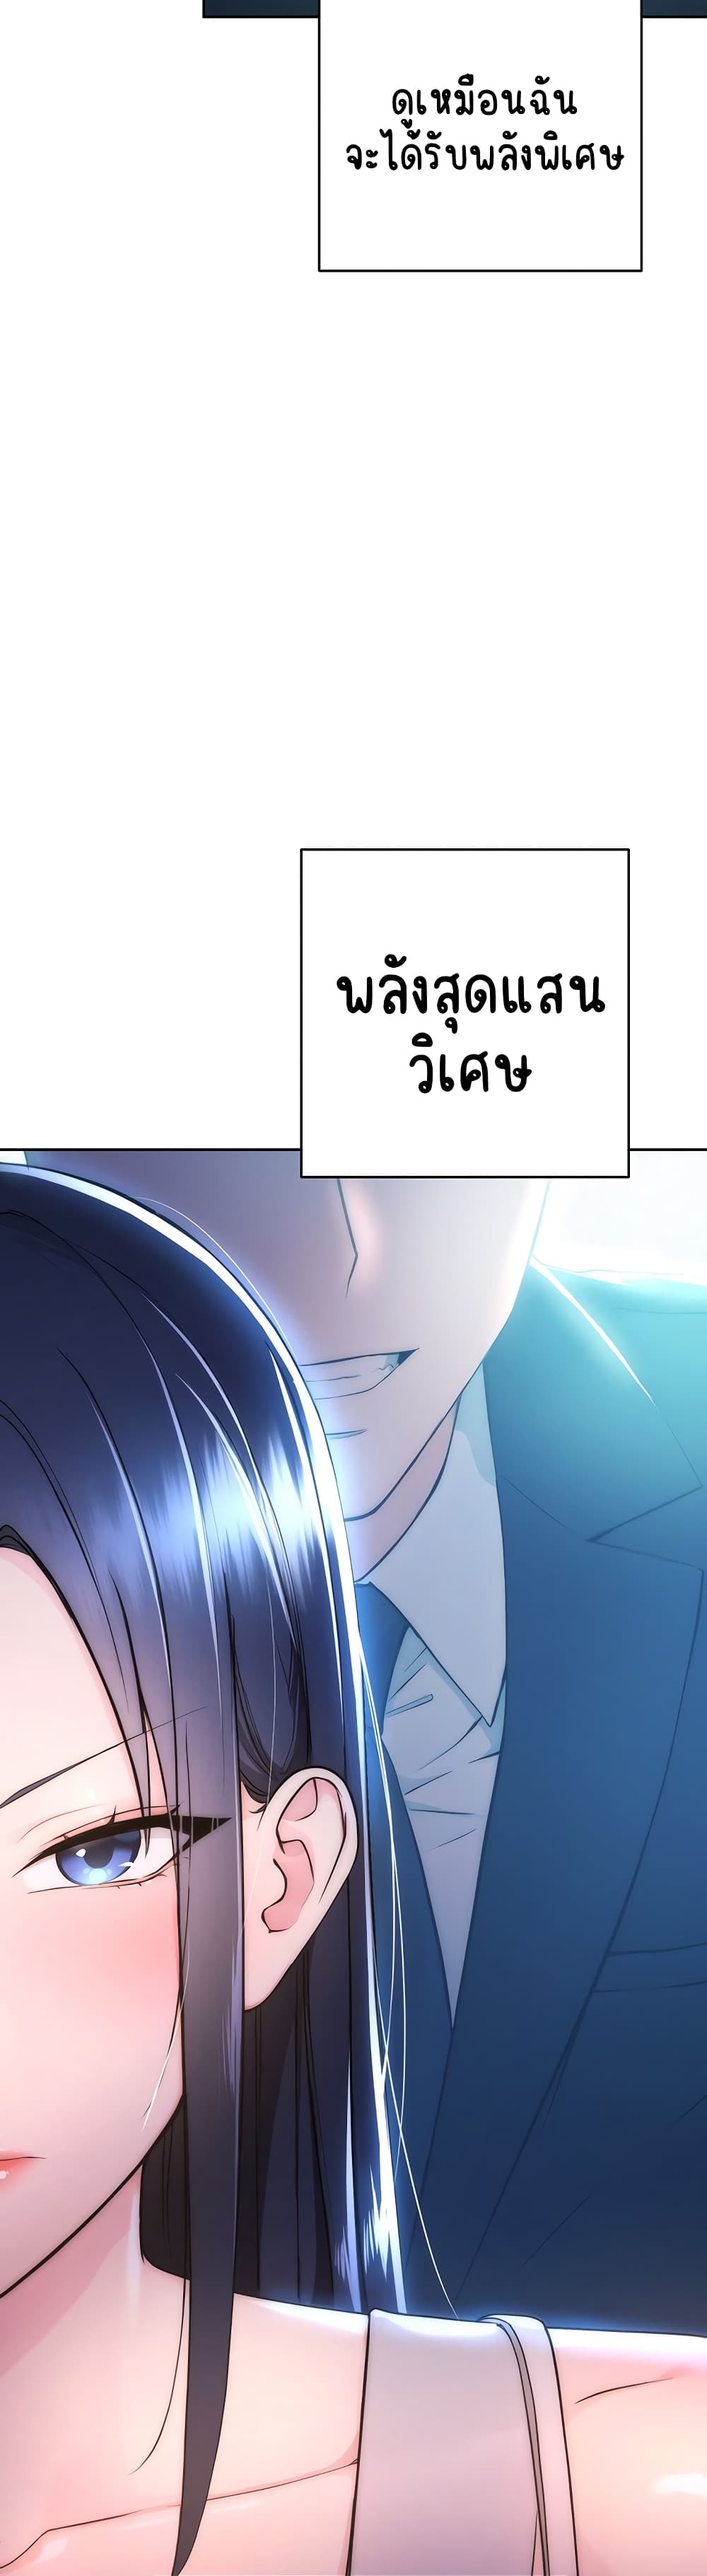 Outsider: The Invisible Man ตอนที่ 1 ภาพ 76